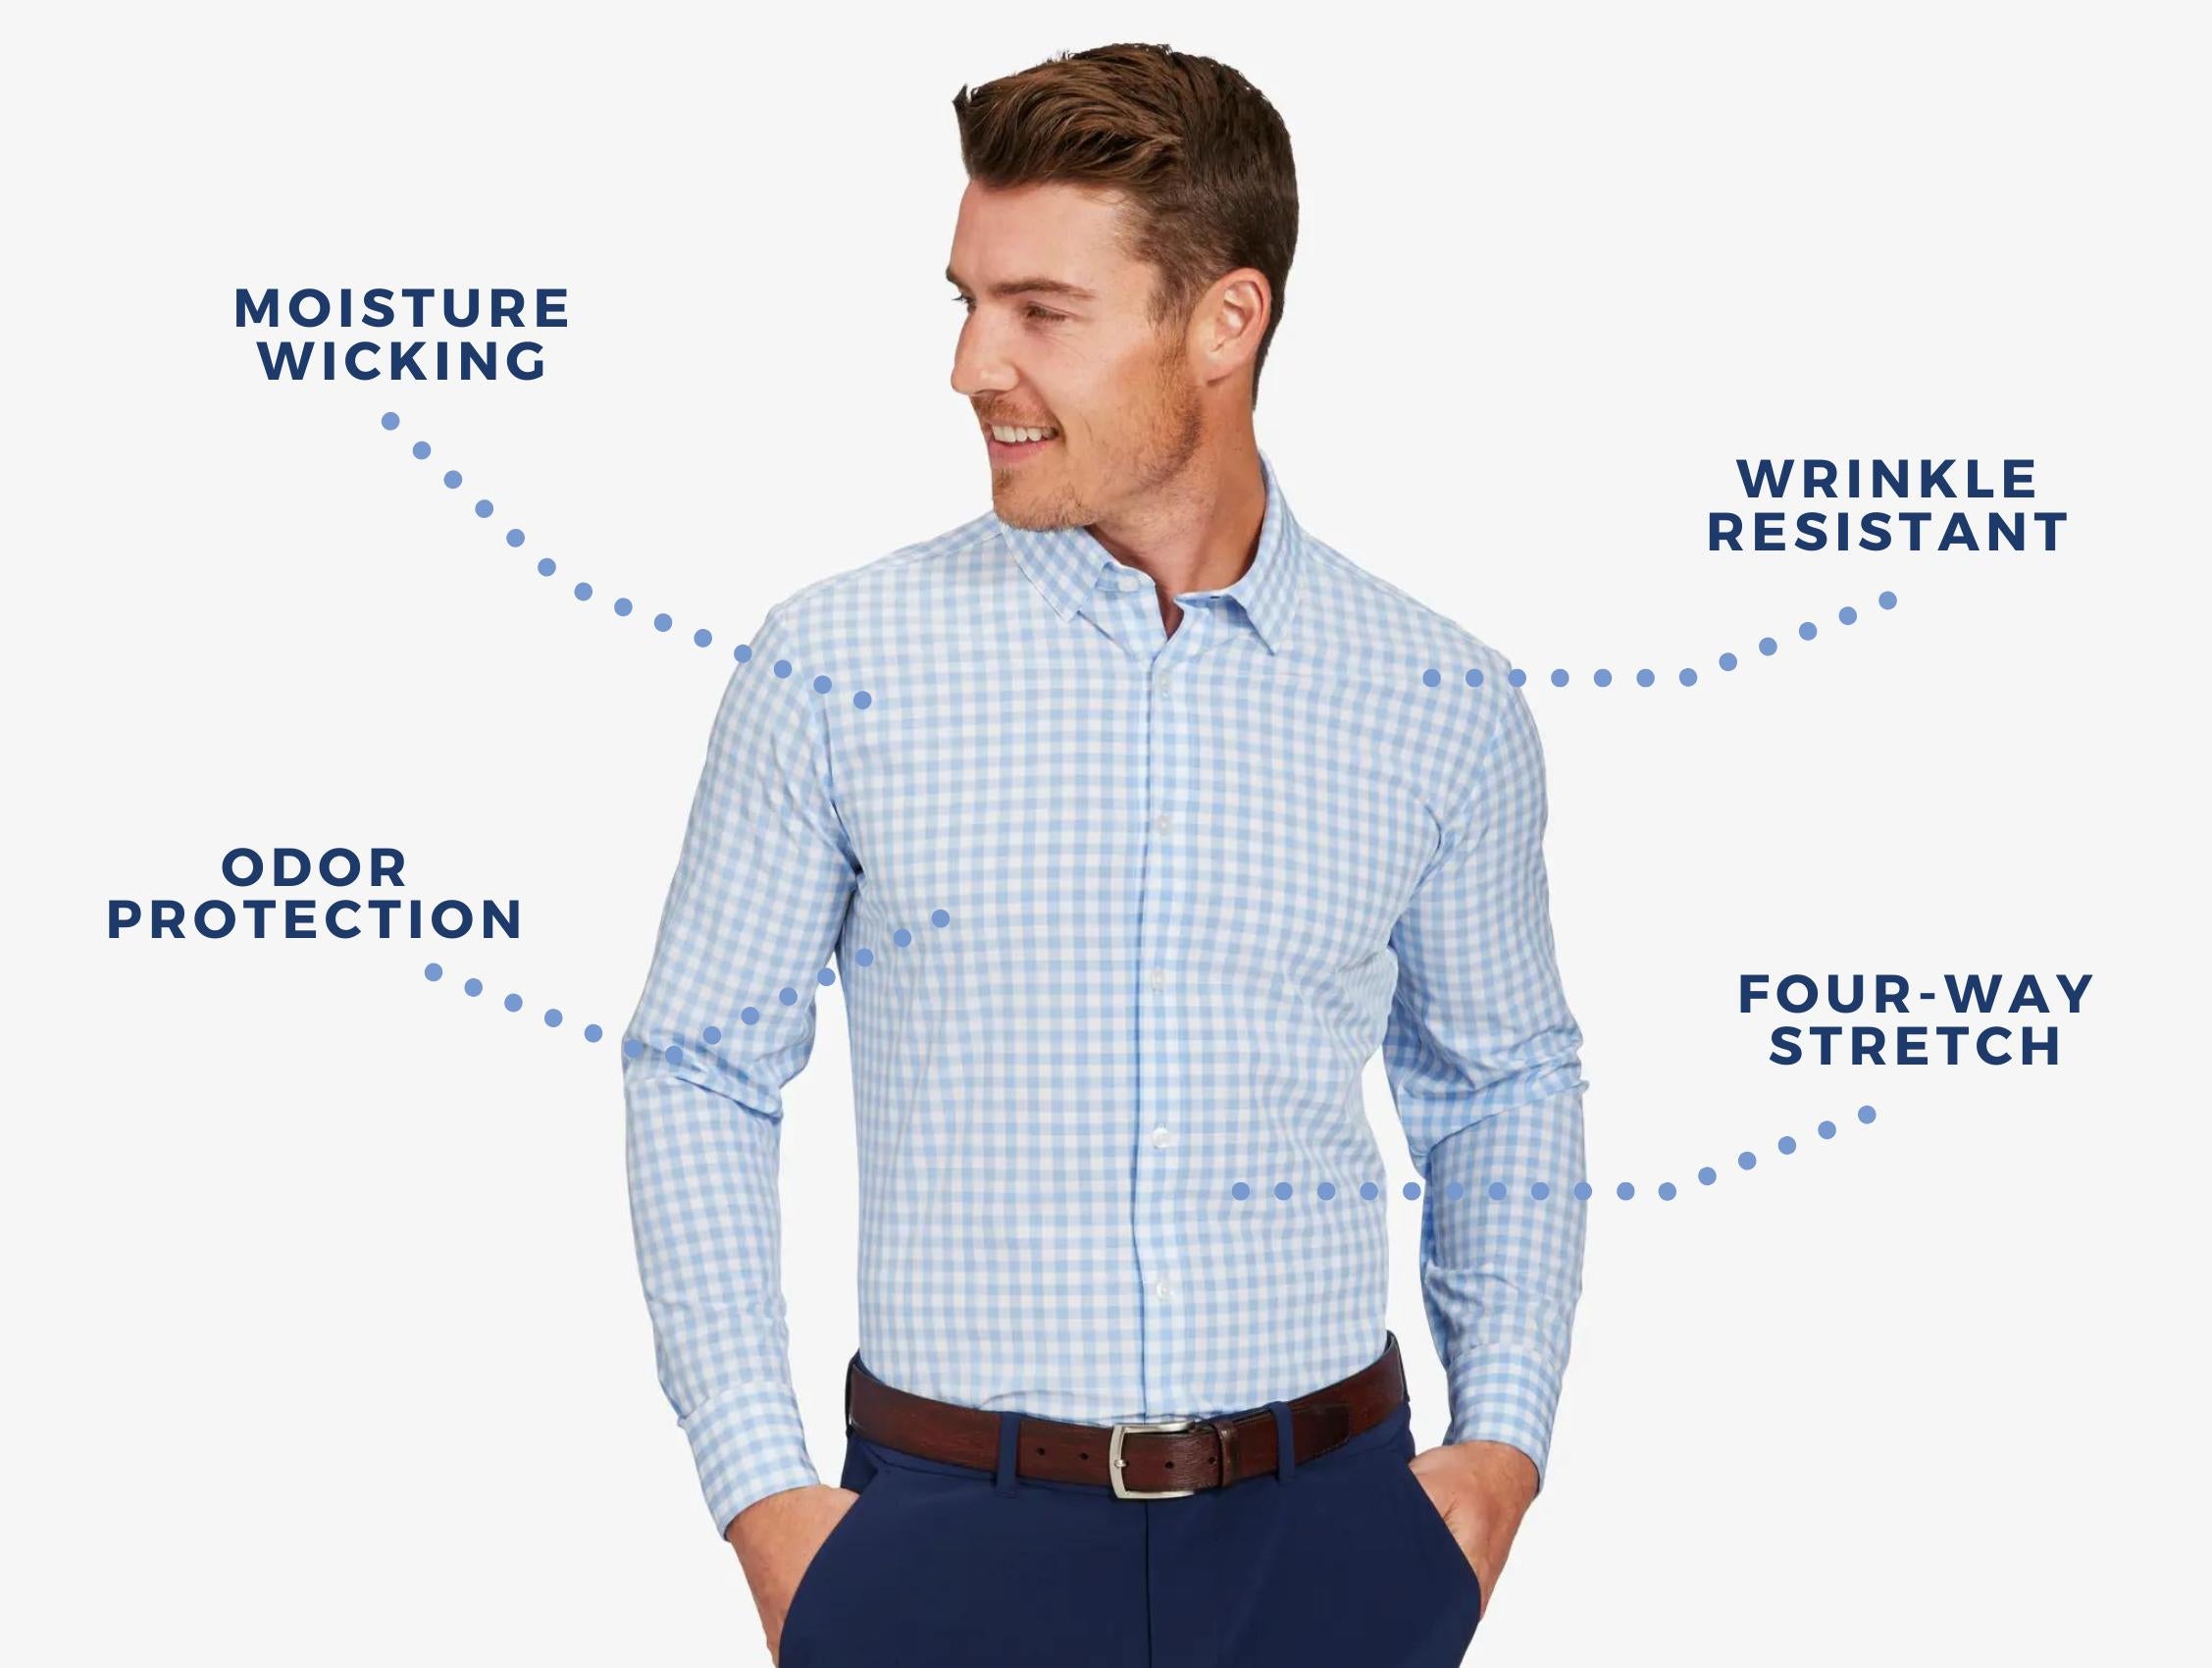 The Mizzen+Main Leeward Dress Shirt offers a Wrinkle Resistant style, with odor protection, moisture wicking material and a four-way stretch for max comfort.